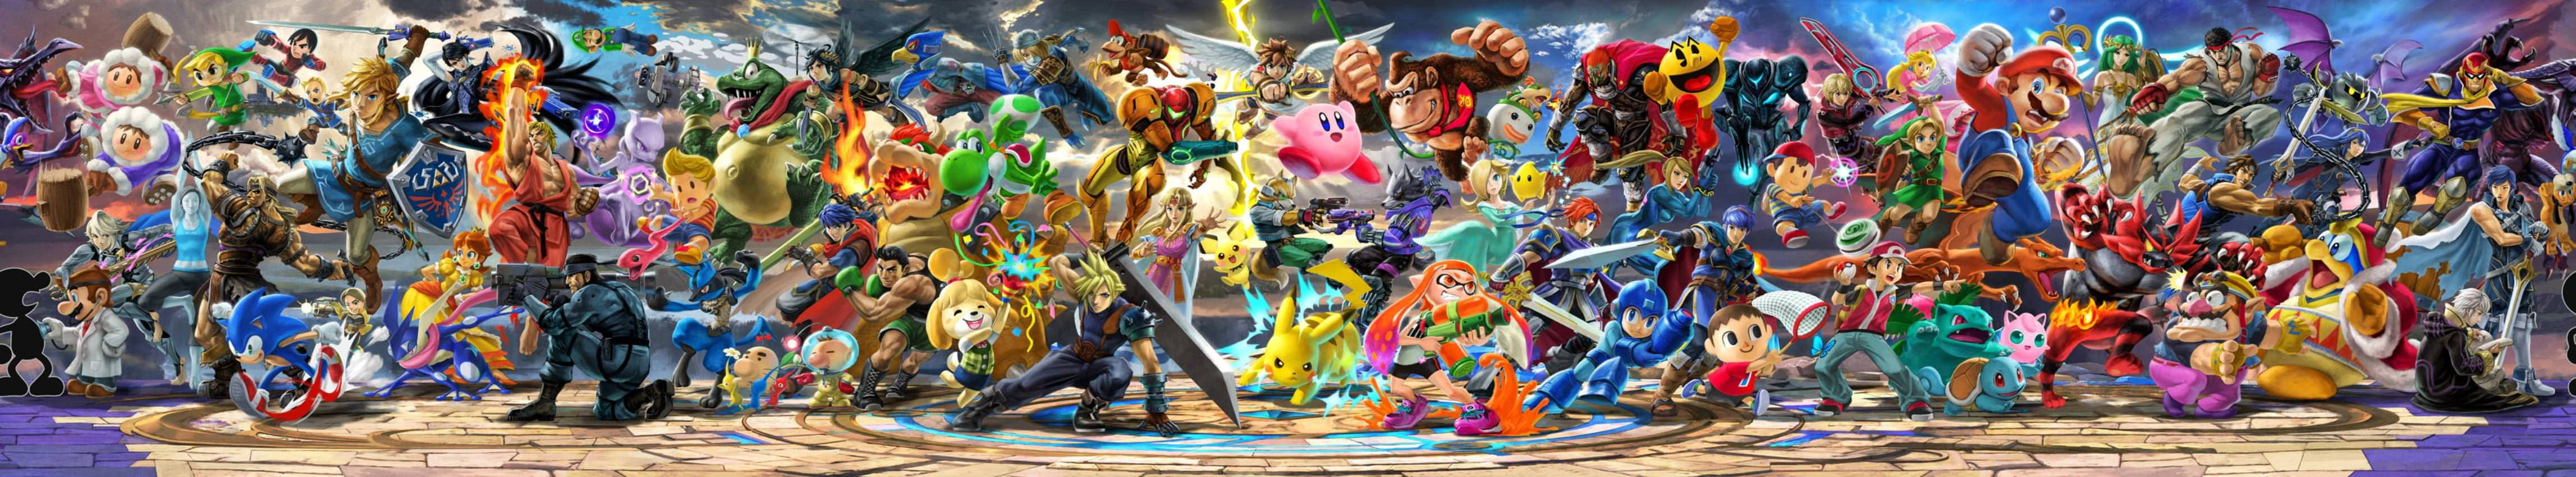 Smash Ultimate In Wide Angle Wallpaper